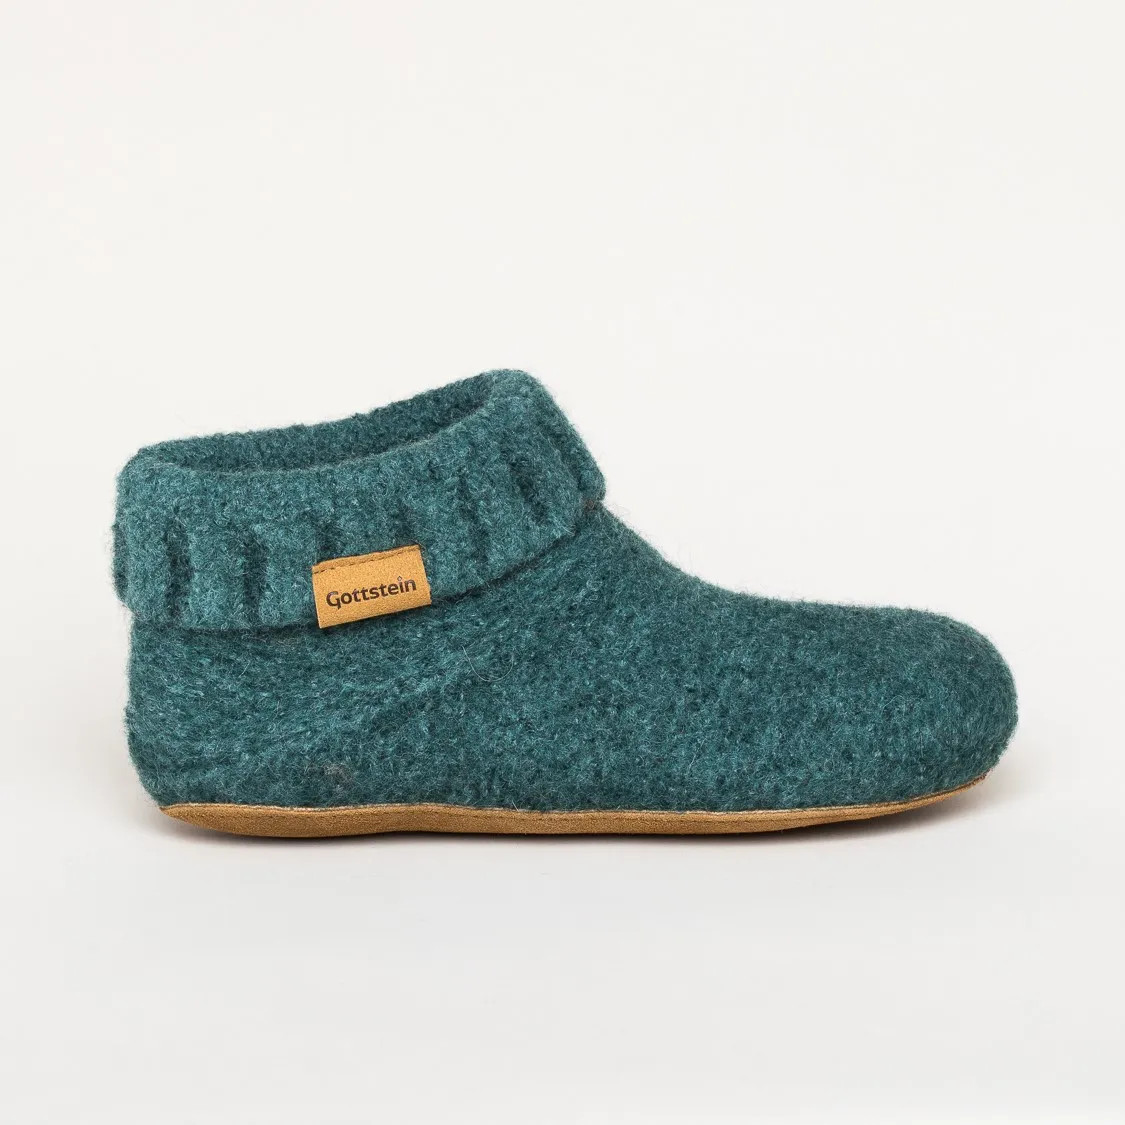 Knit Boot